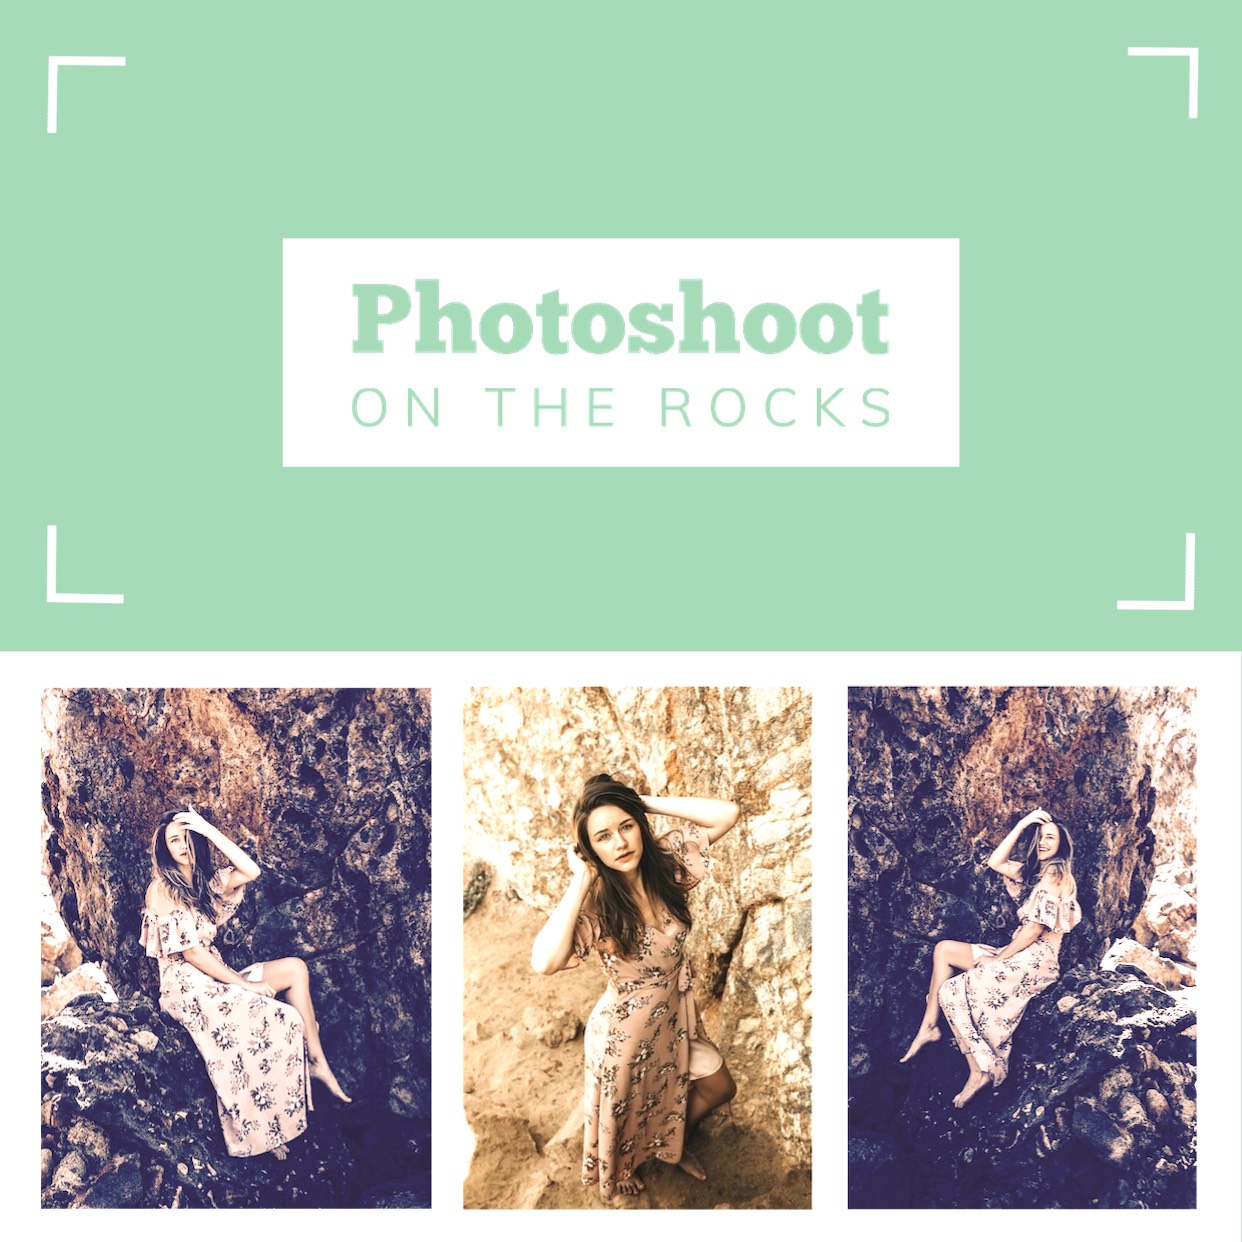 A Woman Sitting On A Rock With The Words Photoshoot On The Rocks Grids Template